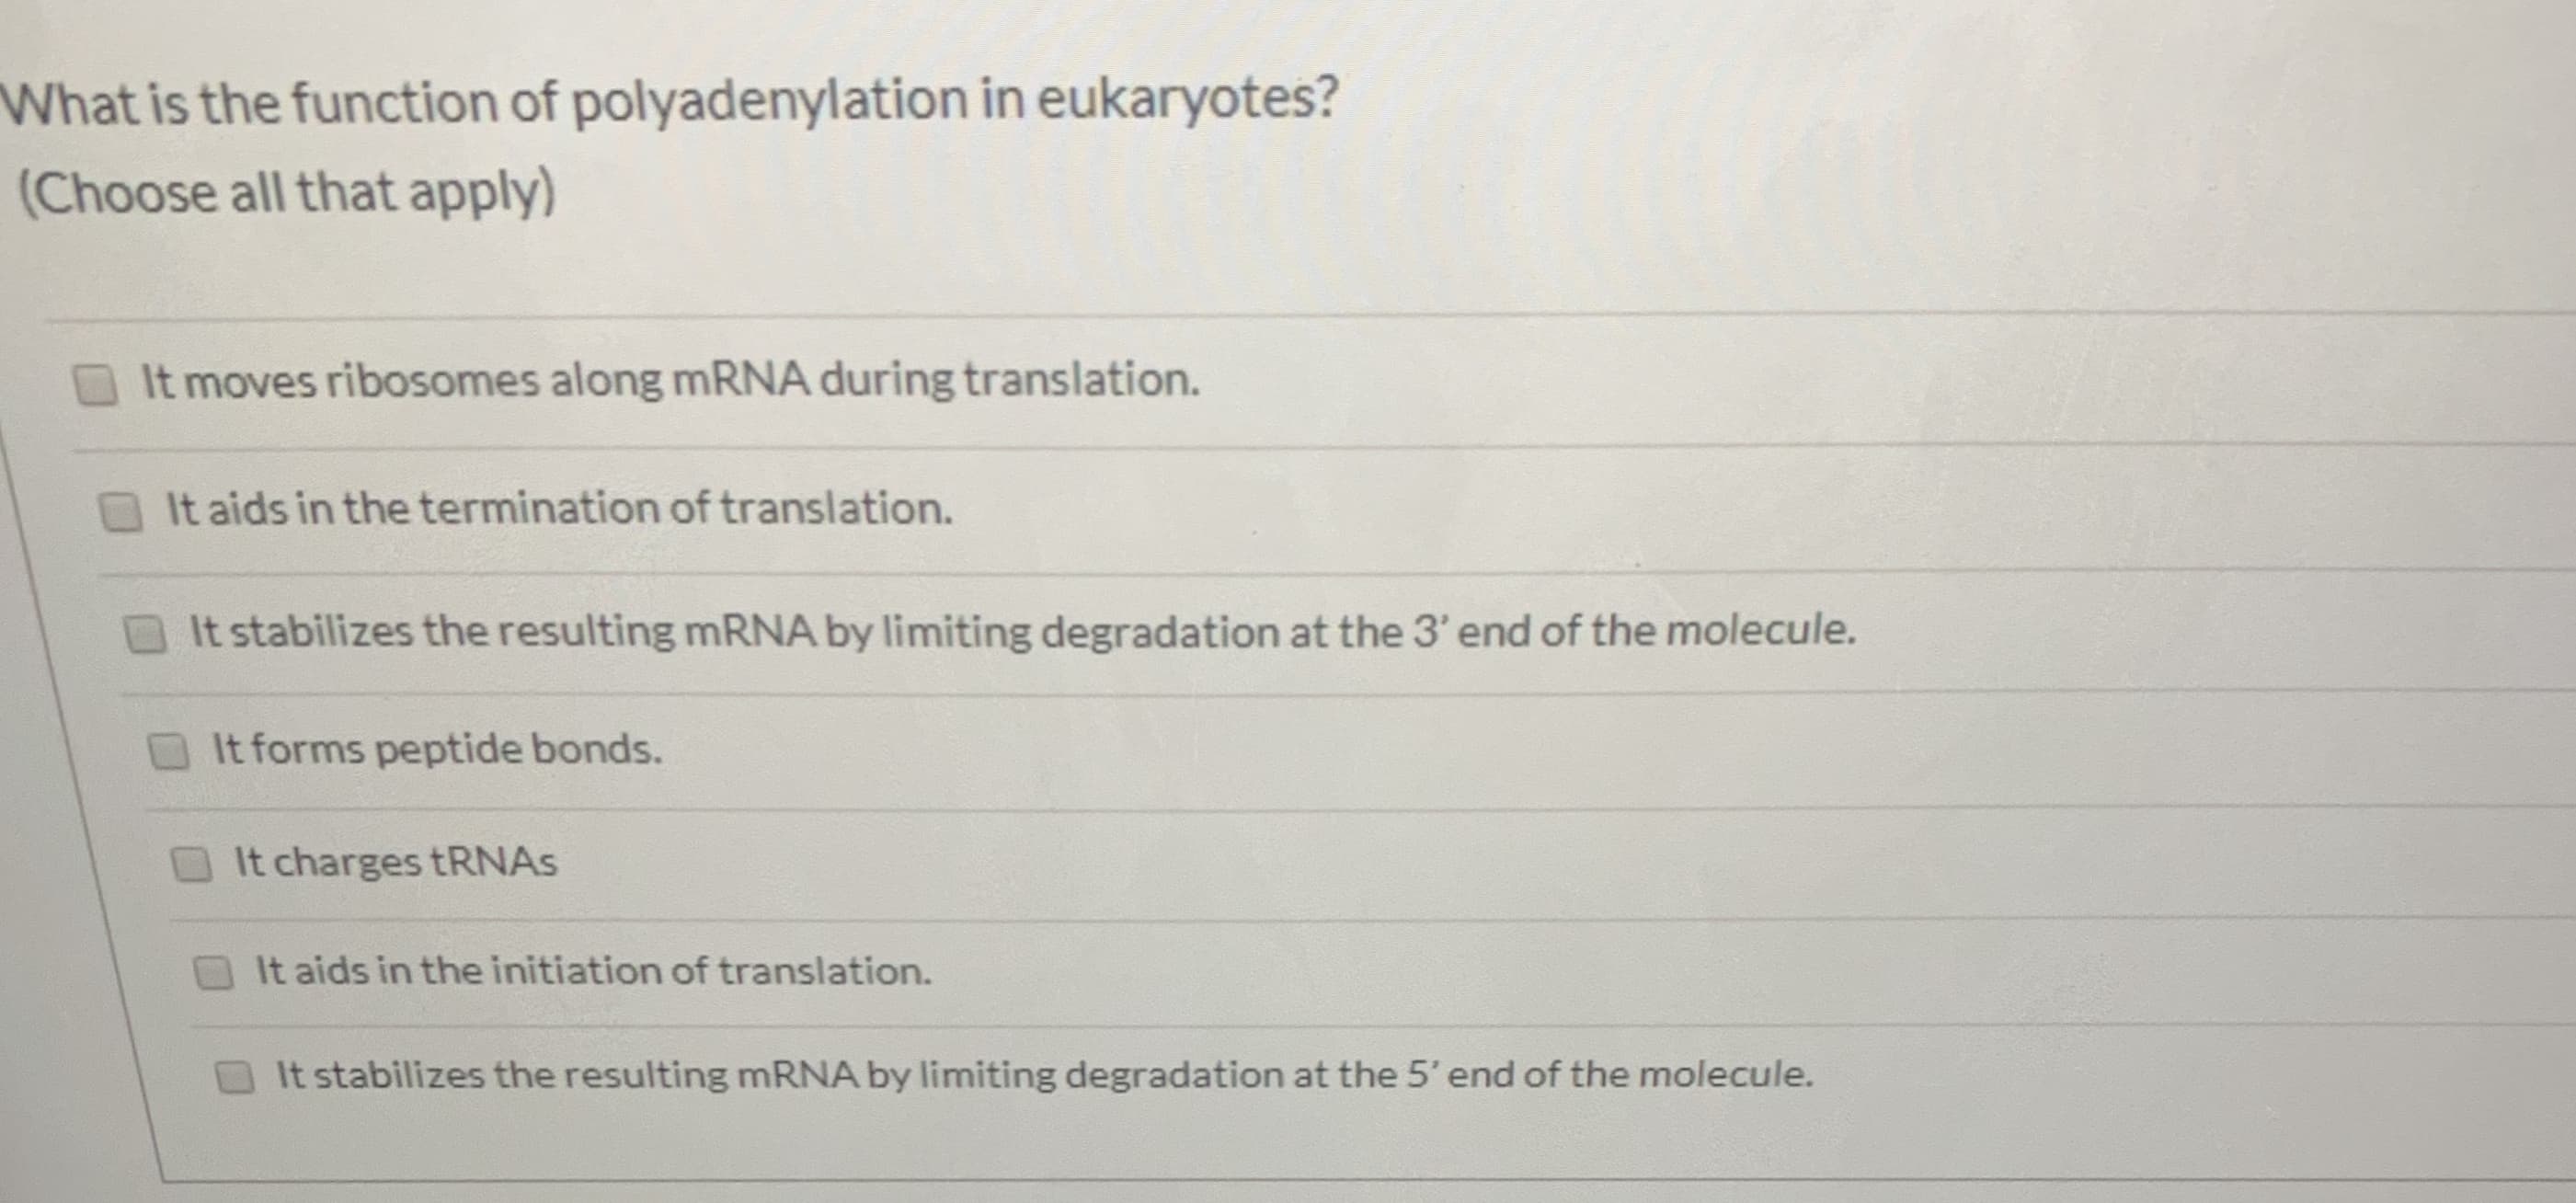 What is the function of polyadenylation in eukaryotes?
(Choose all that apply)
It moves ribosomes along MRNA during translation.
It aids in the termination of translation.
It stabilizes the resulting MRNA by limiting degradation at the 3' end of the molecule.
It forms peptide bonds.
It charges tRNAS
It aids in the initiation of translation.
It stabilizes the resulting MRNA by limiting degradation at the 5' end of the molecule.
